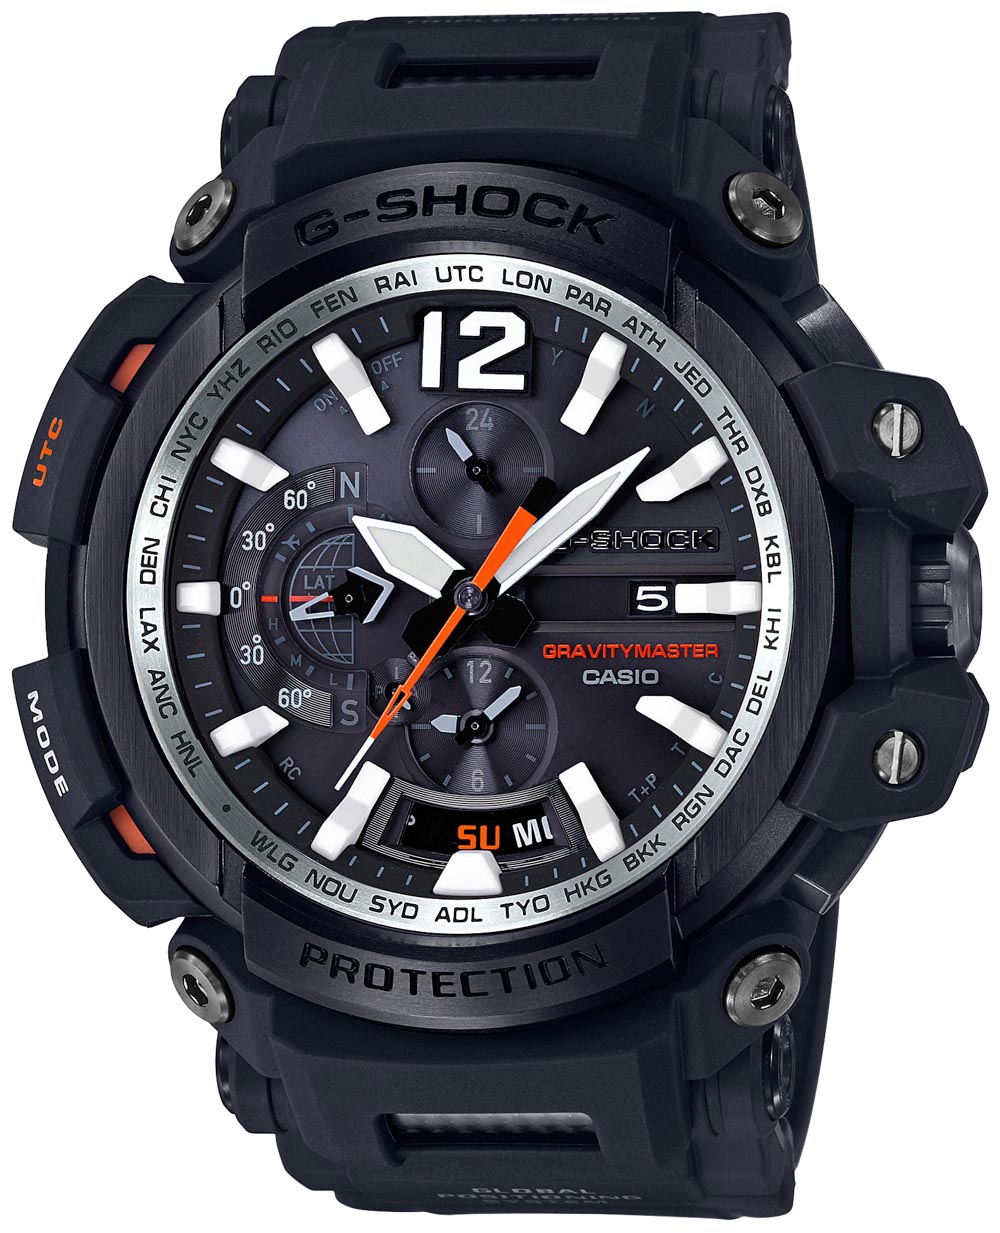 Casio G-Shock Gravitymaster GPW2000-1A GPS Bluetooth Connected Watch Watch Releases 